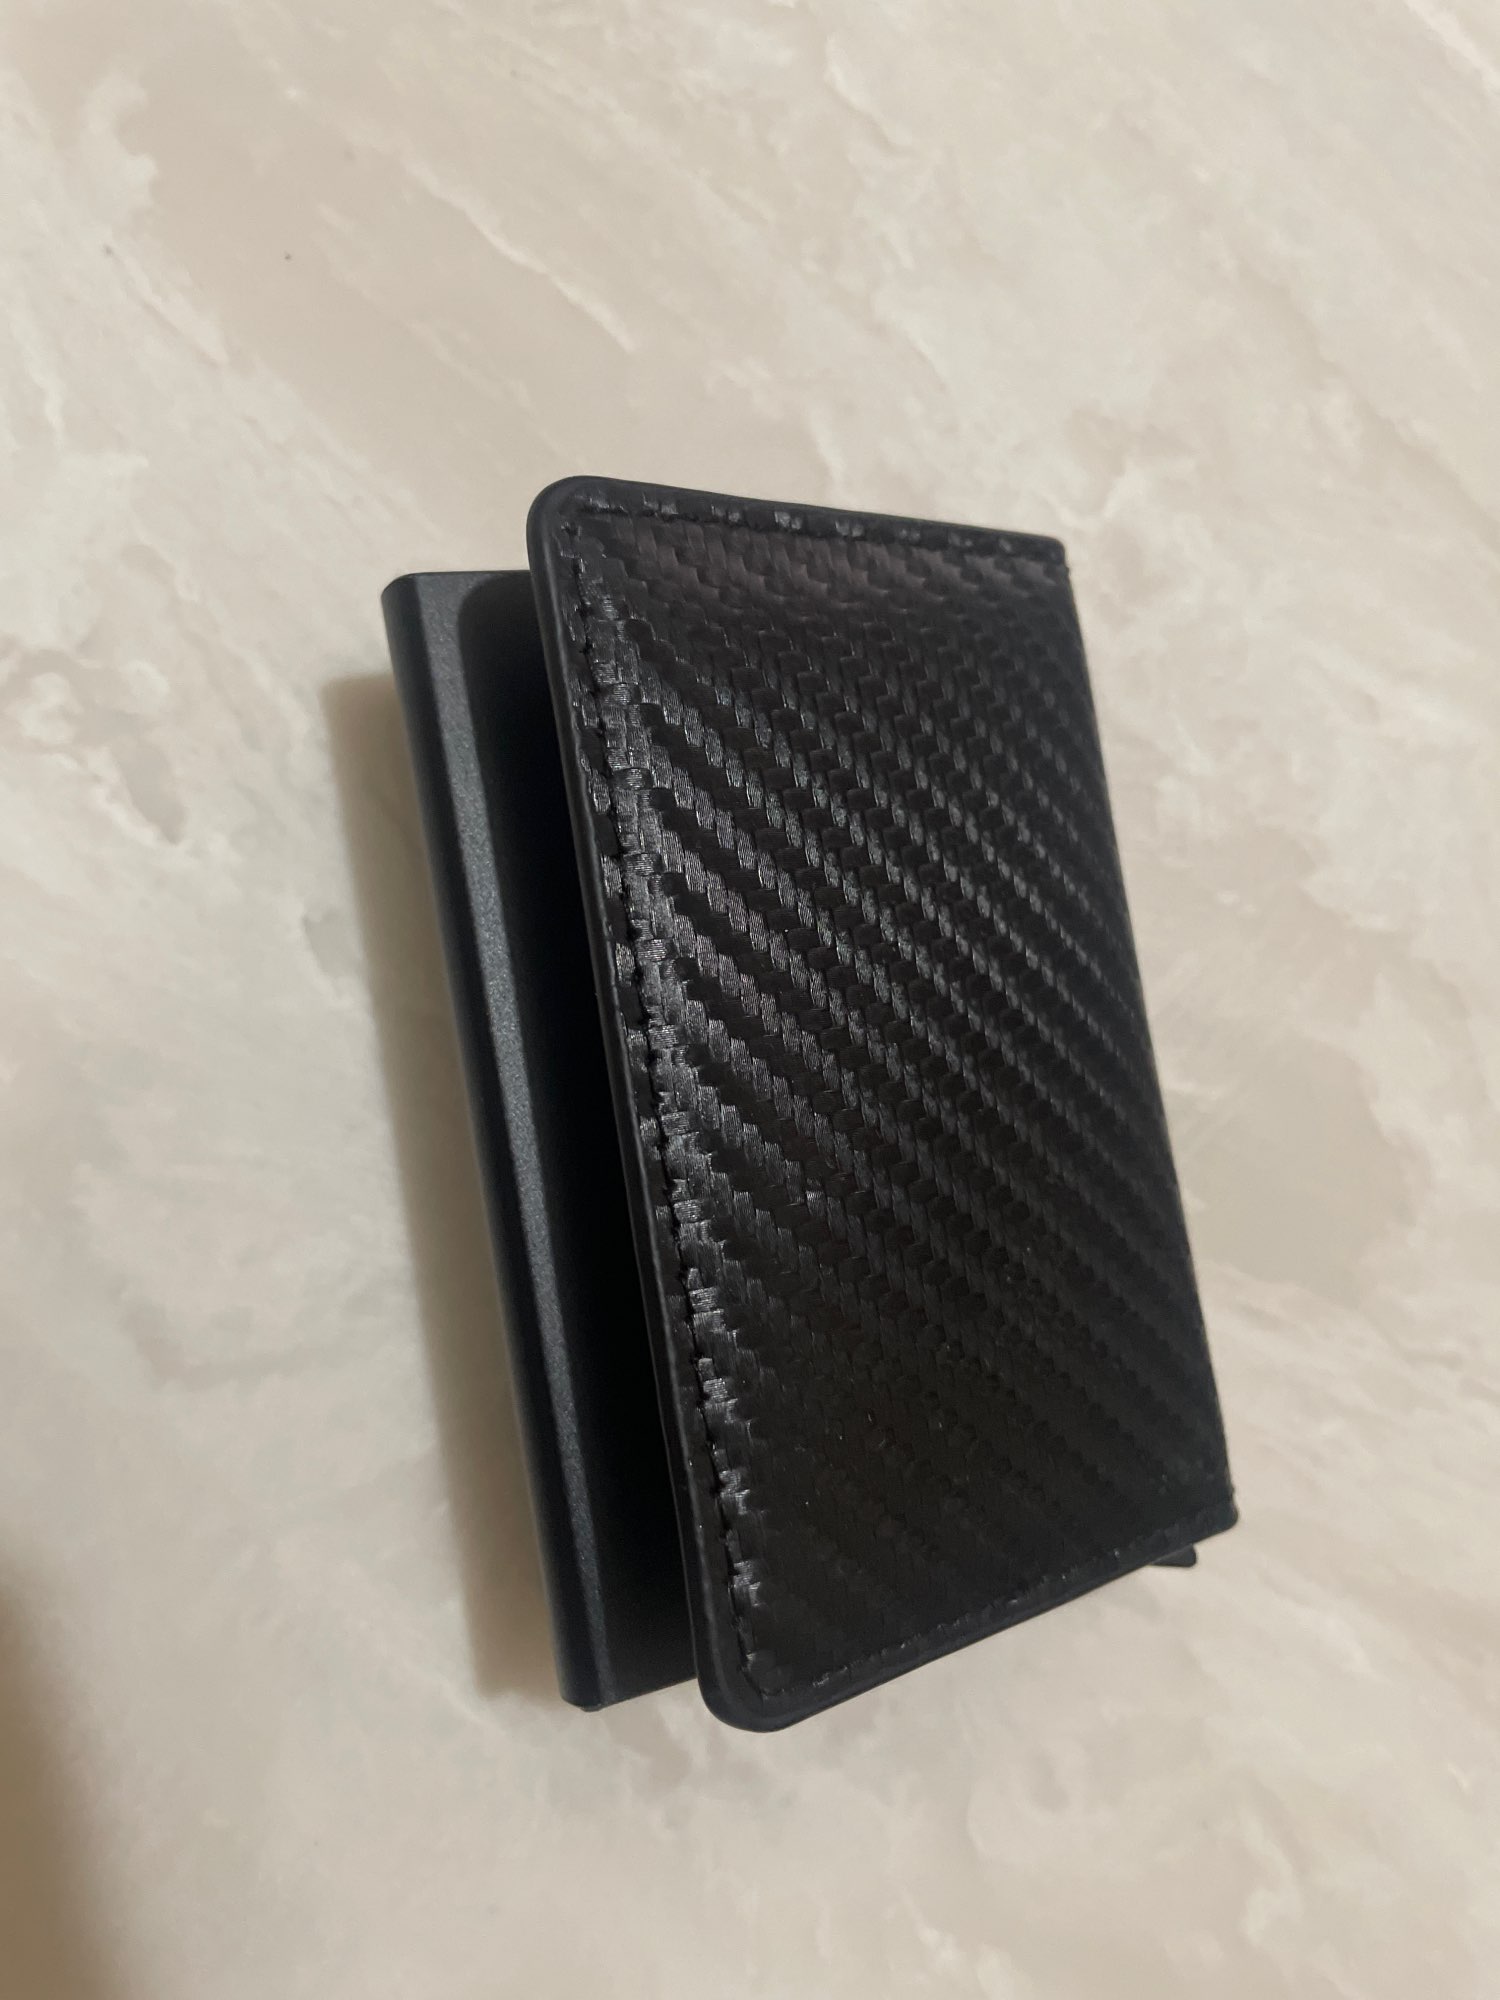 RFID Blocking Pop-up Card Holder Wallet photo review